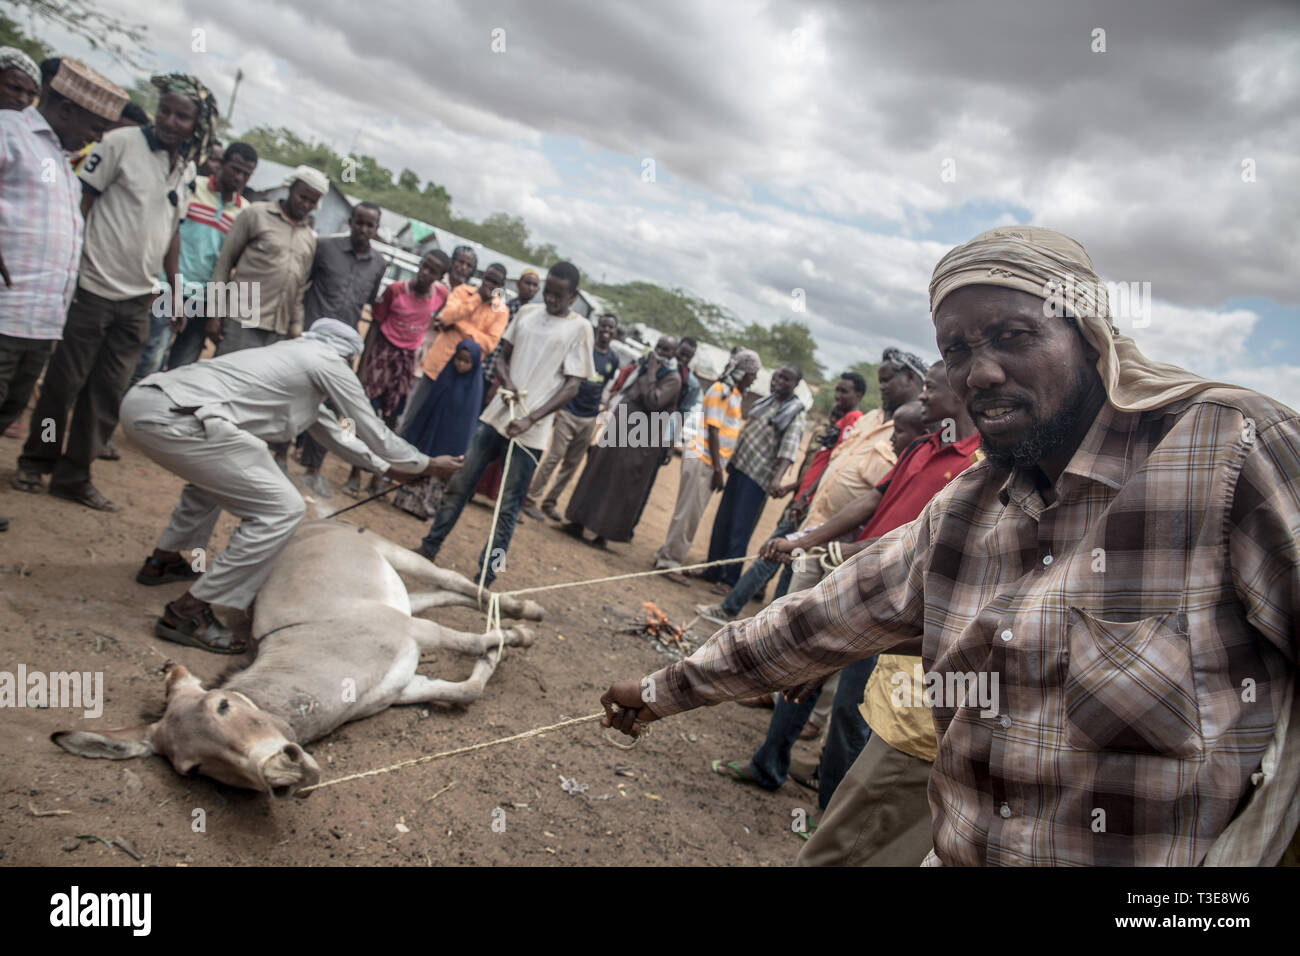 Somali refugees seen branding a donkey in the refugee camp.  Dadaab is one of the largest refugee camps in the world. More than 200,000 refugees live there - mostly Somalis who fled civil war or famine in Somalia. Stock Photo